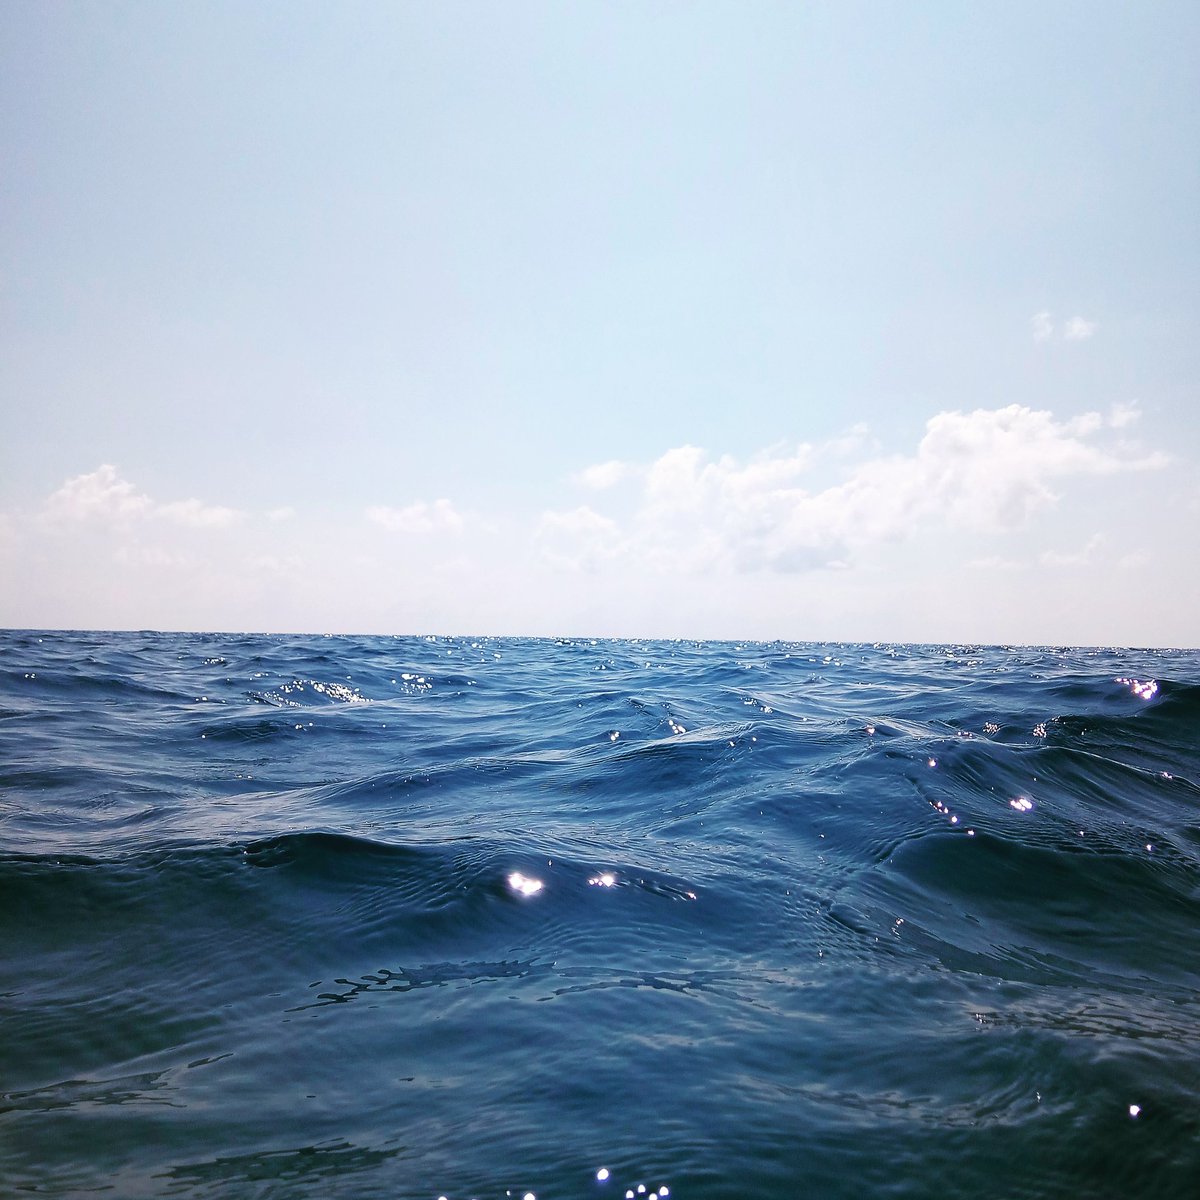 The sea goes on and on and on for it's infinitely beautiful. #sea #photography #pretty #photo #day #cool #beauty #beautiful #thursdayphoto #aesthetics #earth #deepsea #voyage #travel #Islandlife #afternoon #awesome